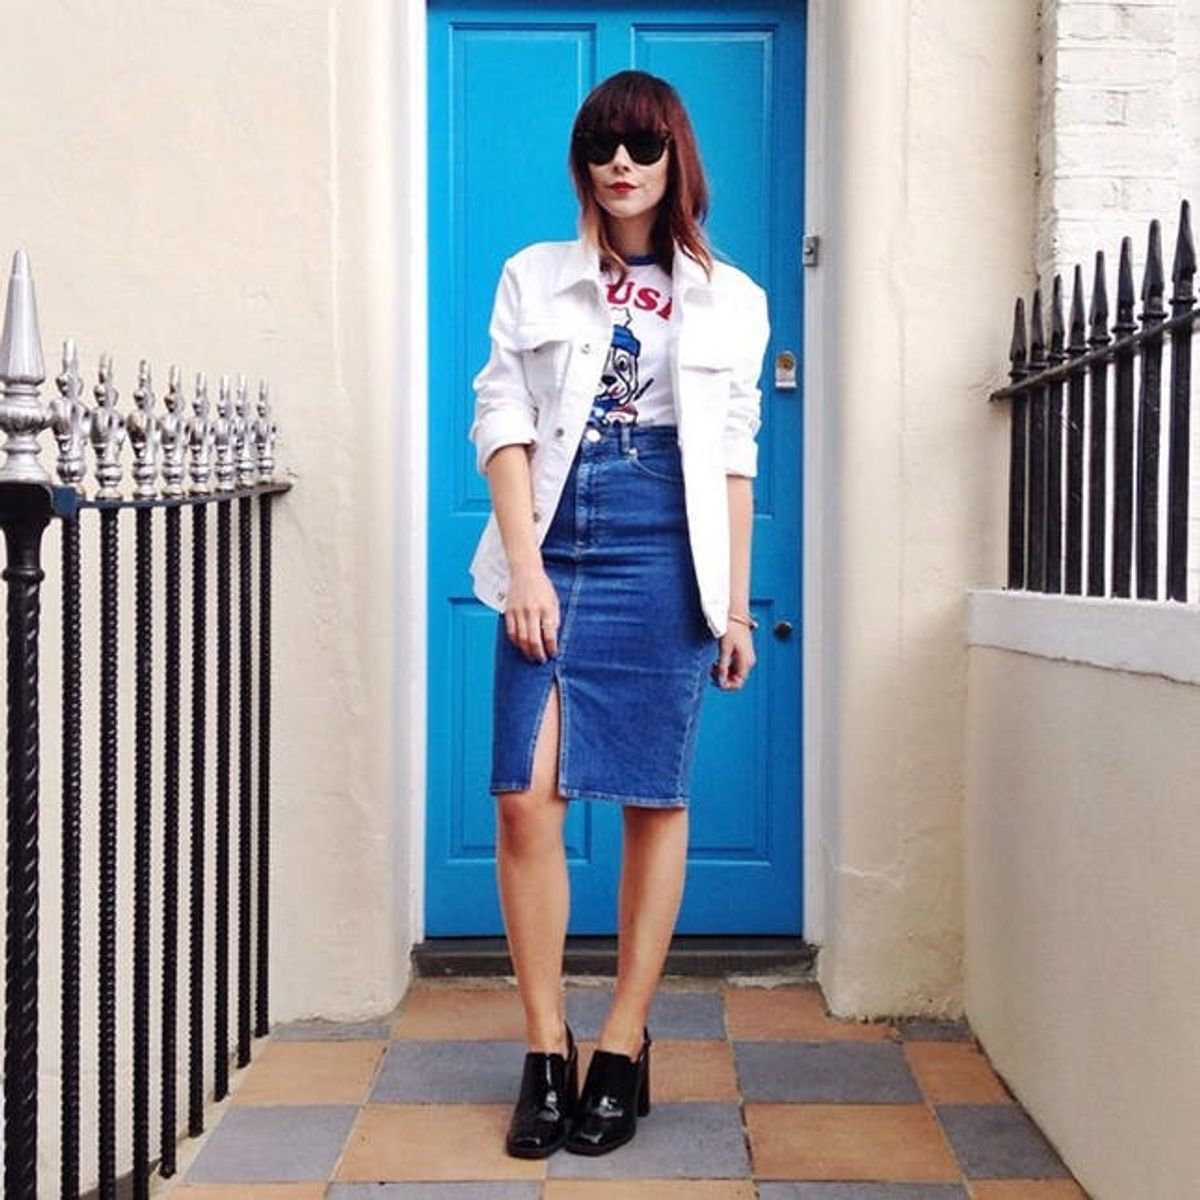 7 #OOTDs of the Week: 7 Stylish Ways to Wear Red, White + Blue